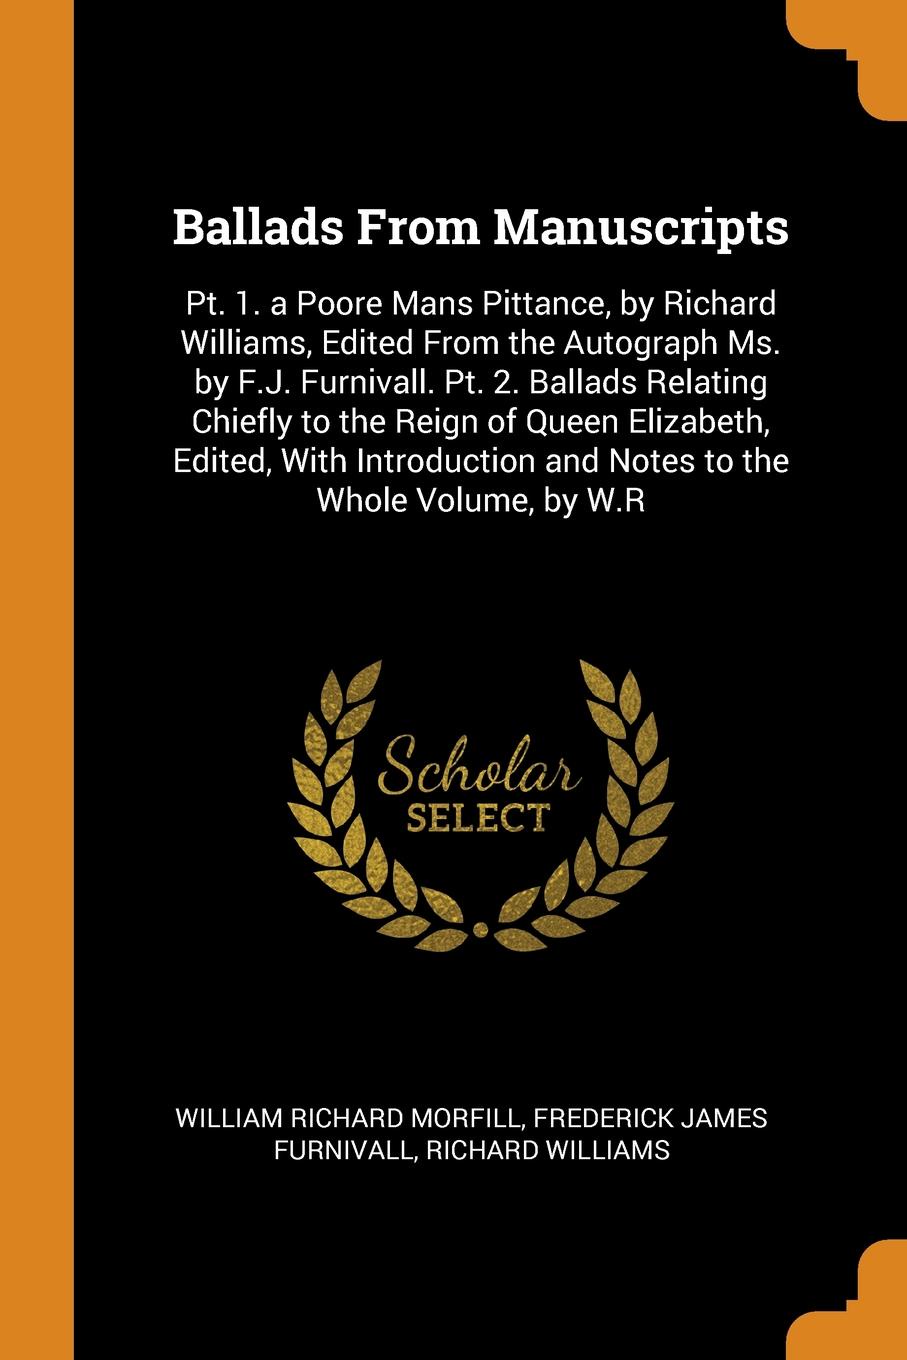 Ballads From Manuscripts. Pt. 1. a Poore Mans Pittance, by Richard Williams, Edited From the Autograph Ms. by F.J. Furnivall. Pt. 2. Ballads Relating Chiefly to the Reign of Queen Elizabeth, Edited, With Introduction and Notes to the Whole Volume,...